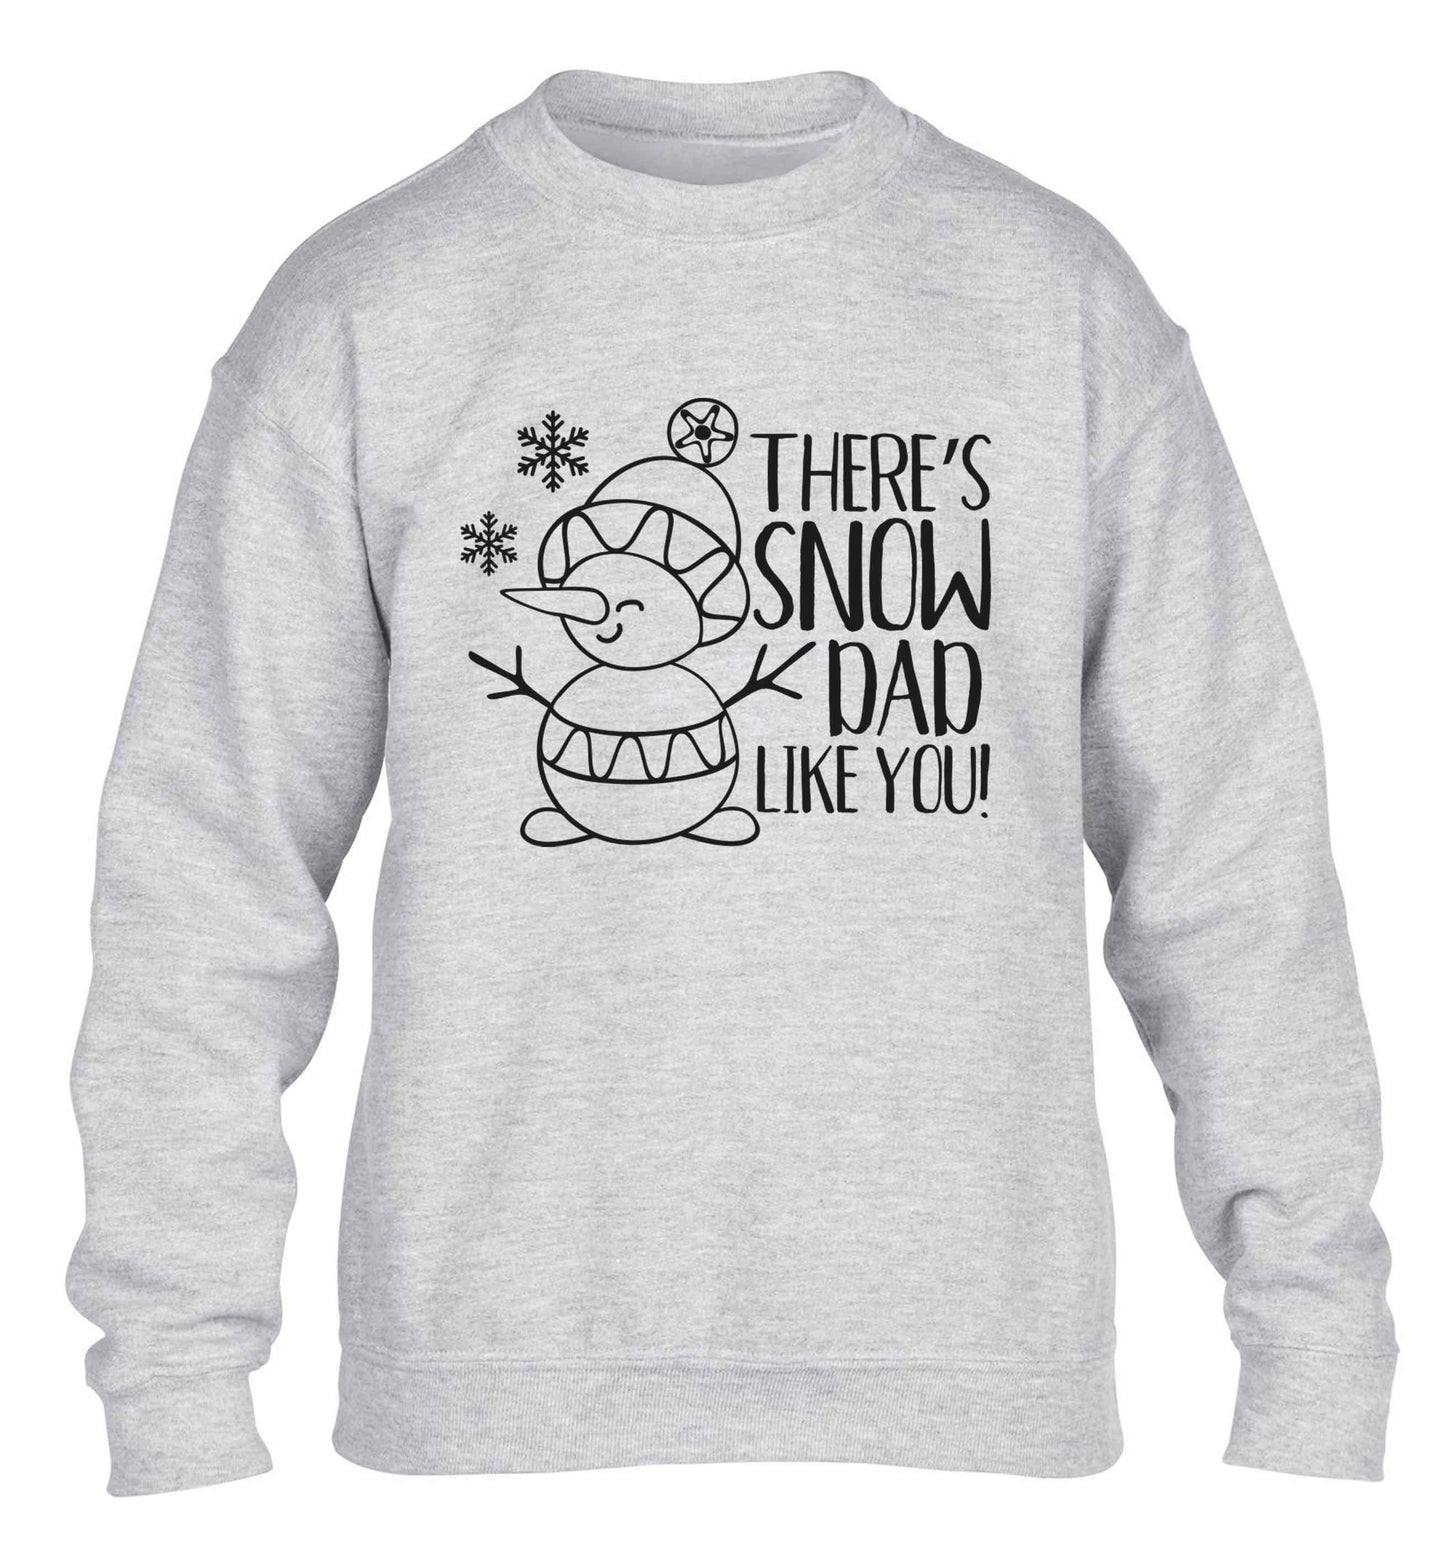 There's snow dad like you children's grey sweater 12-13 Years